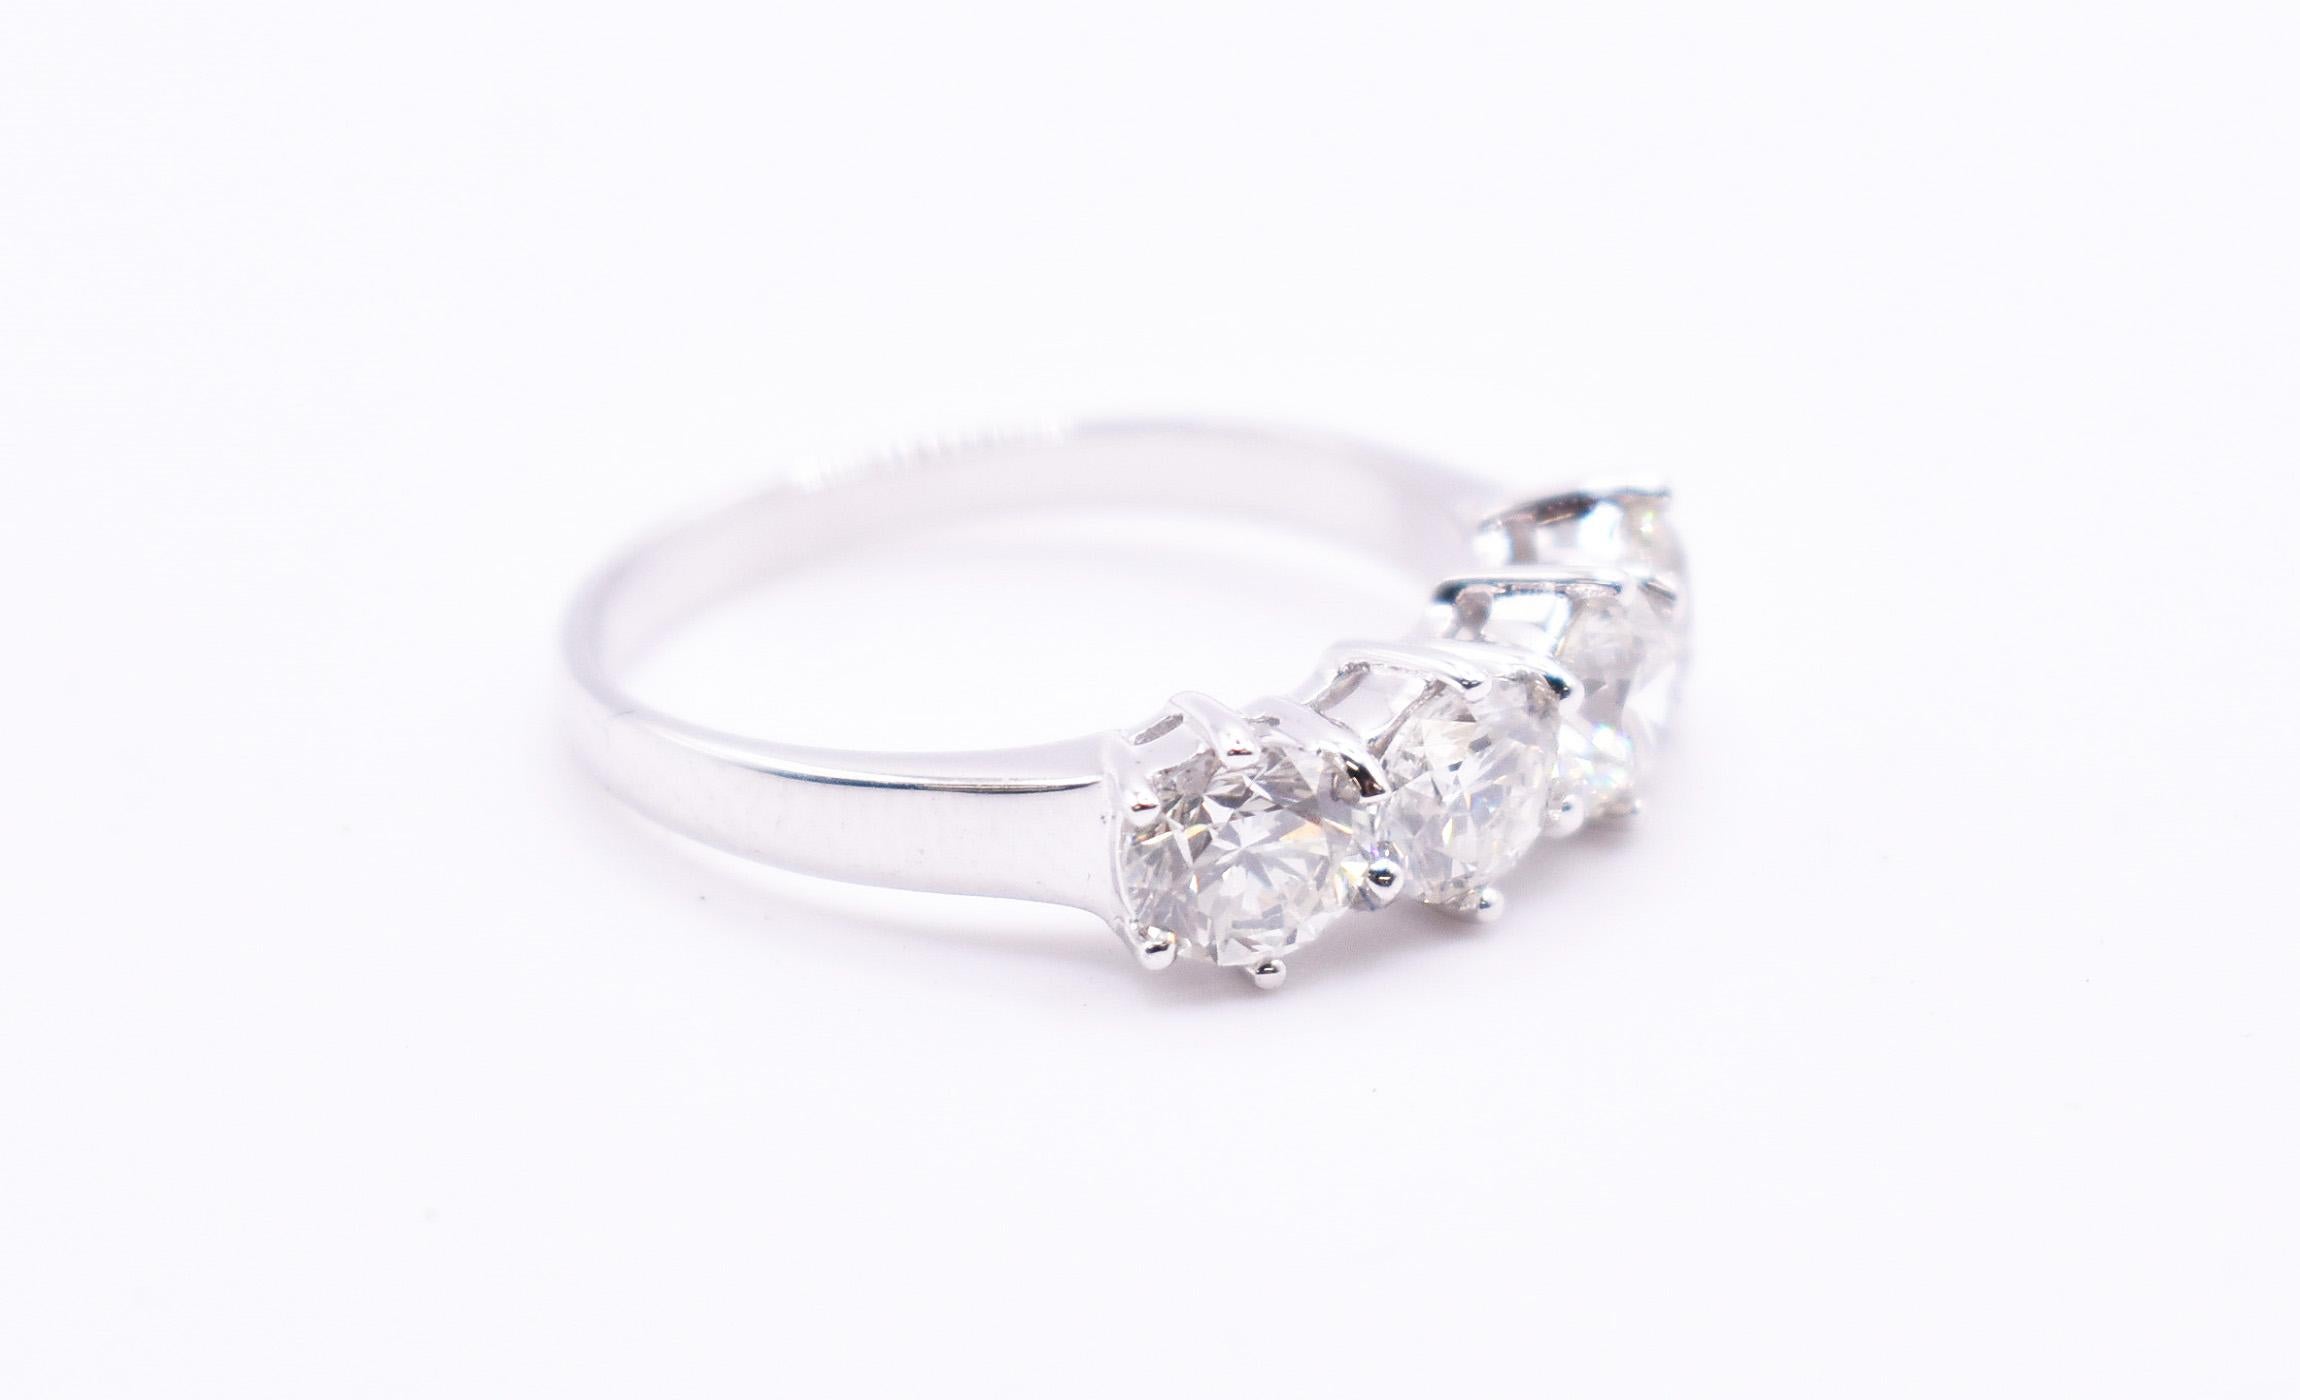 A lovely 18k white gold 4 stone diamond ring, featuring four round cut, prong set diamonds on a tapered band. Diamonds = 1.92ct Gold weight = 4.44g